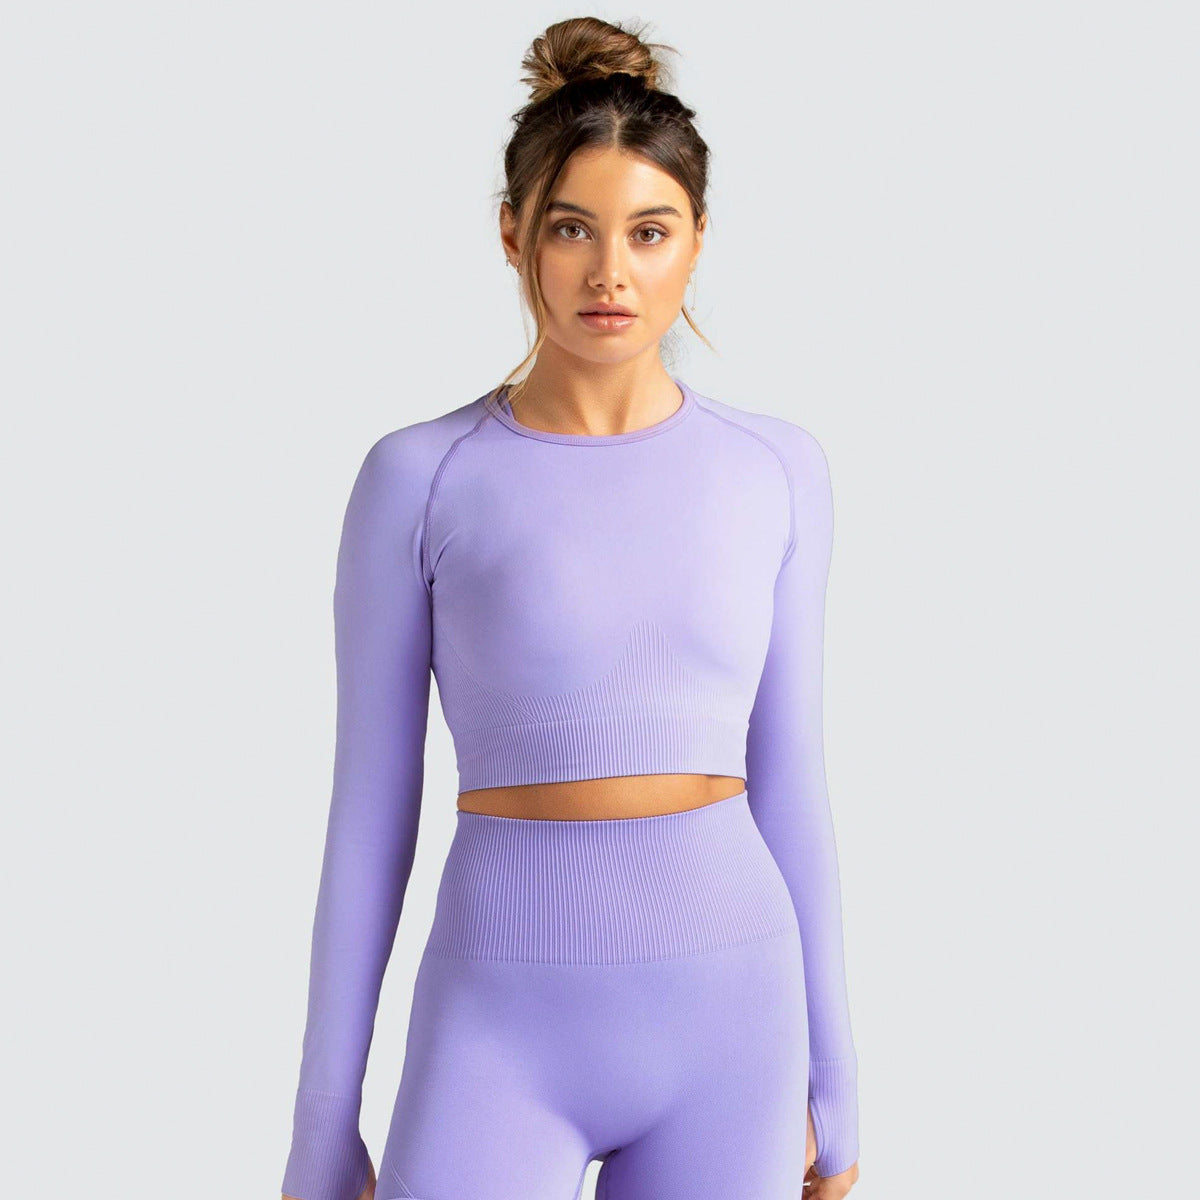 Knitted Seamless Slim-Fit Long-Sleeved Yoga Exercise Workout Clothes